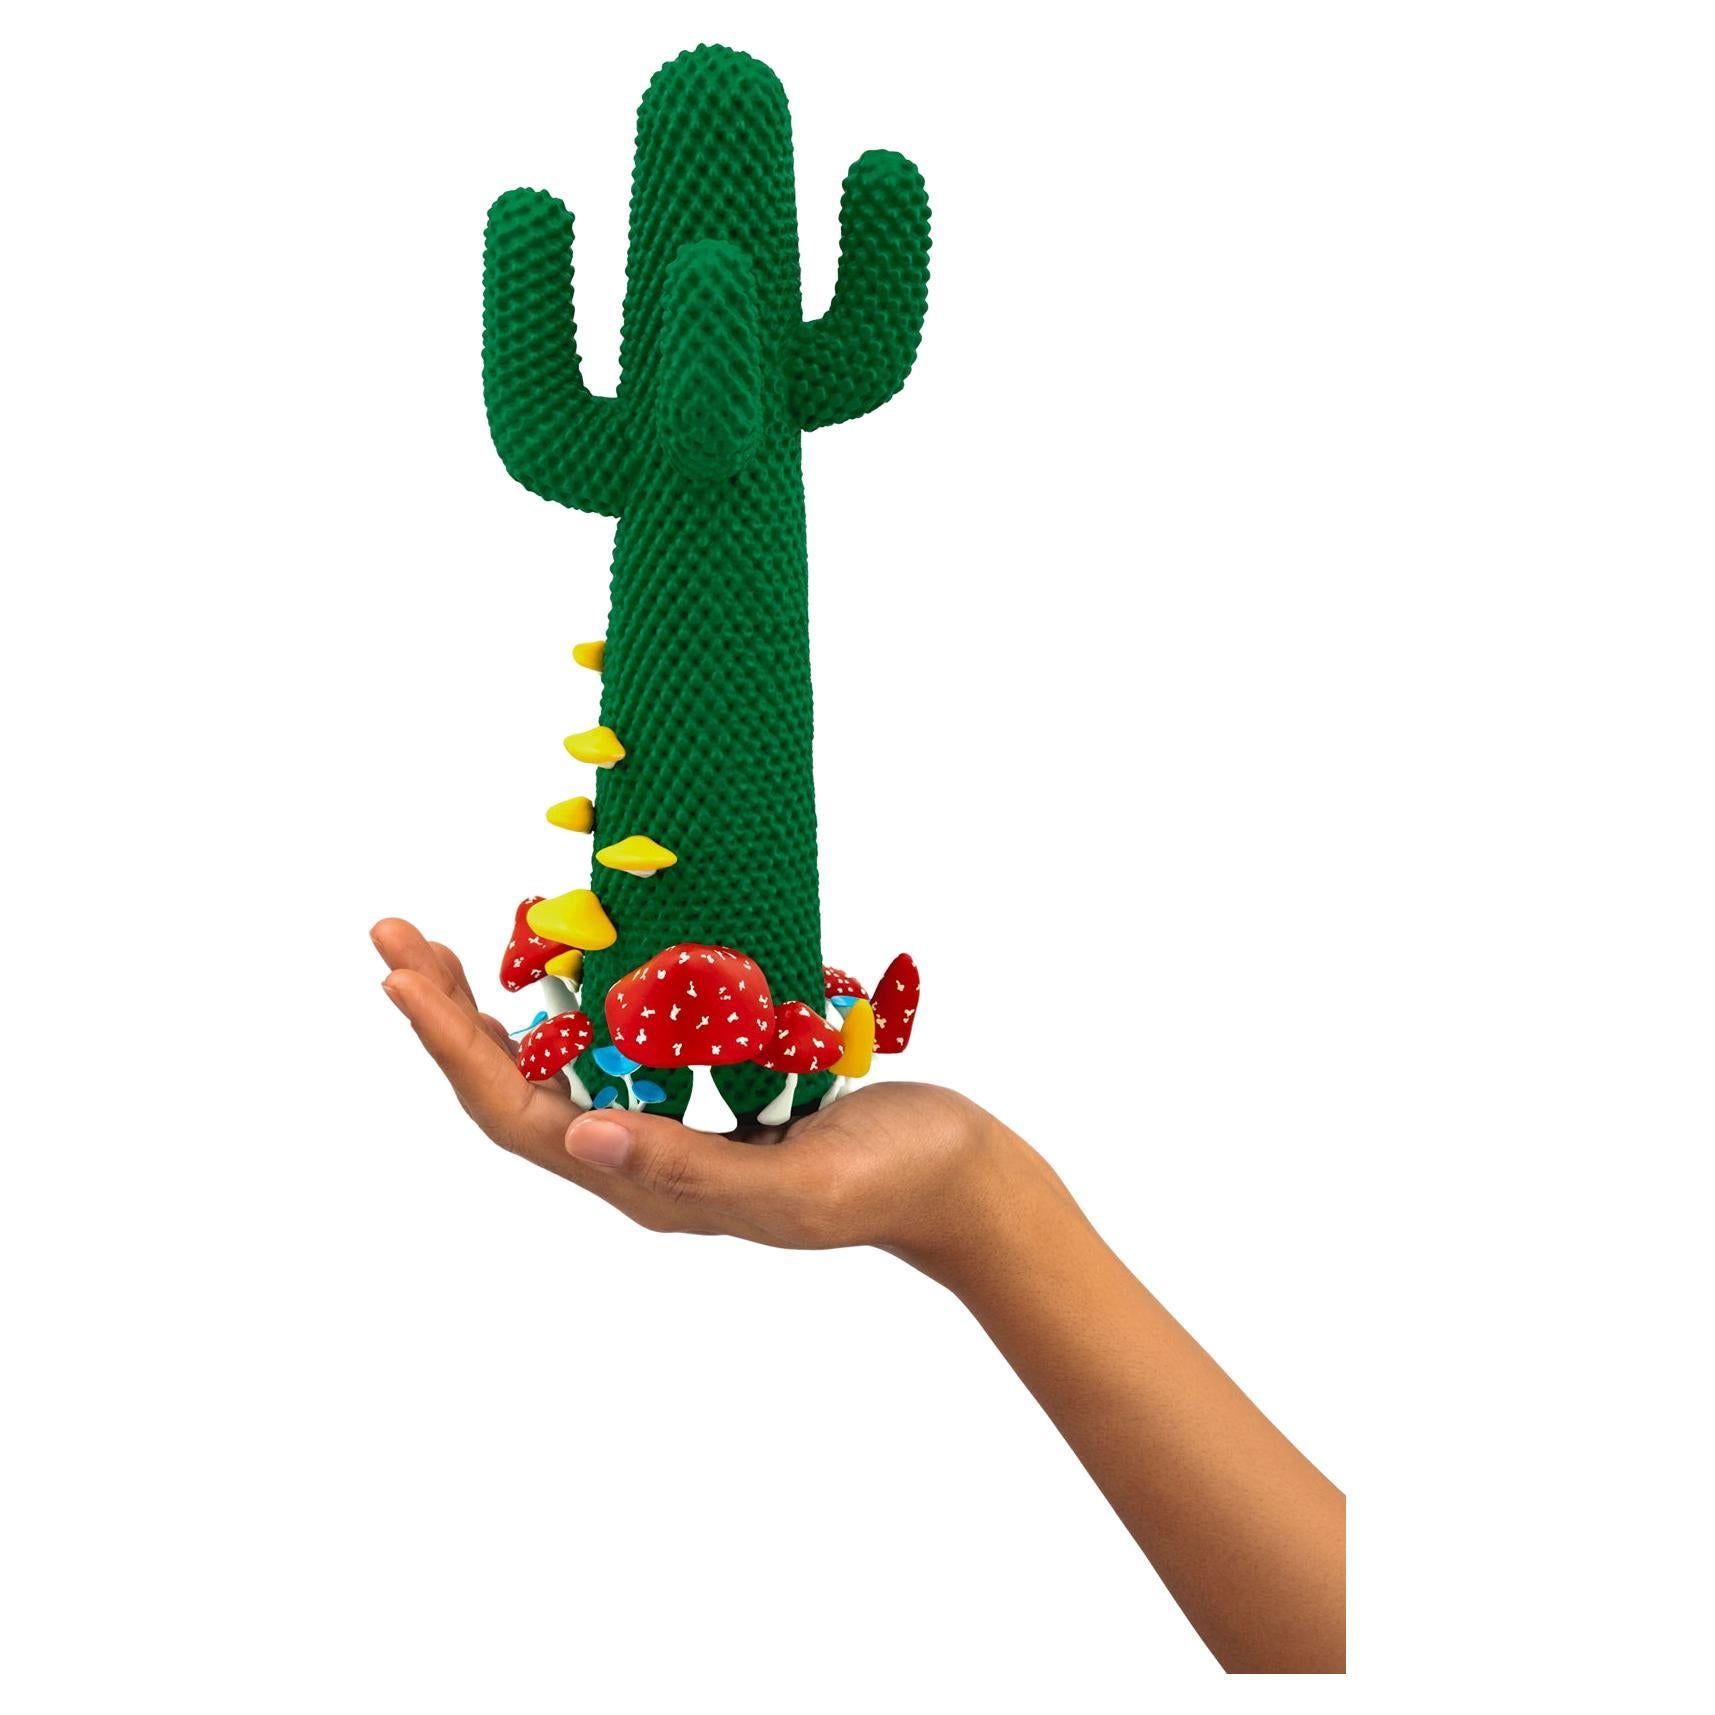 Limited Edition #17/99

Gufram presents the miniaturised version of the Shroom CACTUS® created in collaboration with A$AP Rocky and the artist’s new design studio HOMMEMADE Exactly as the real-Size Shroom CACTUS®, the new Guframini piece features